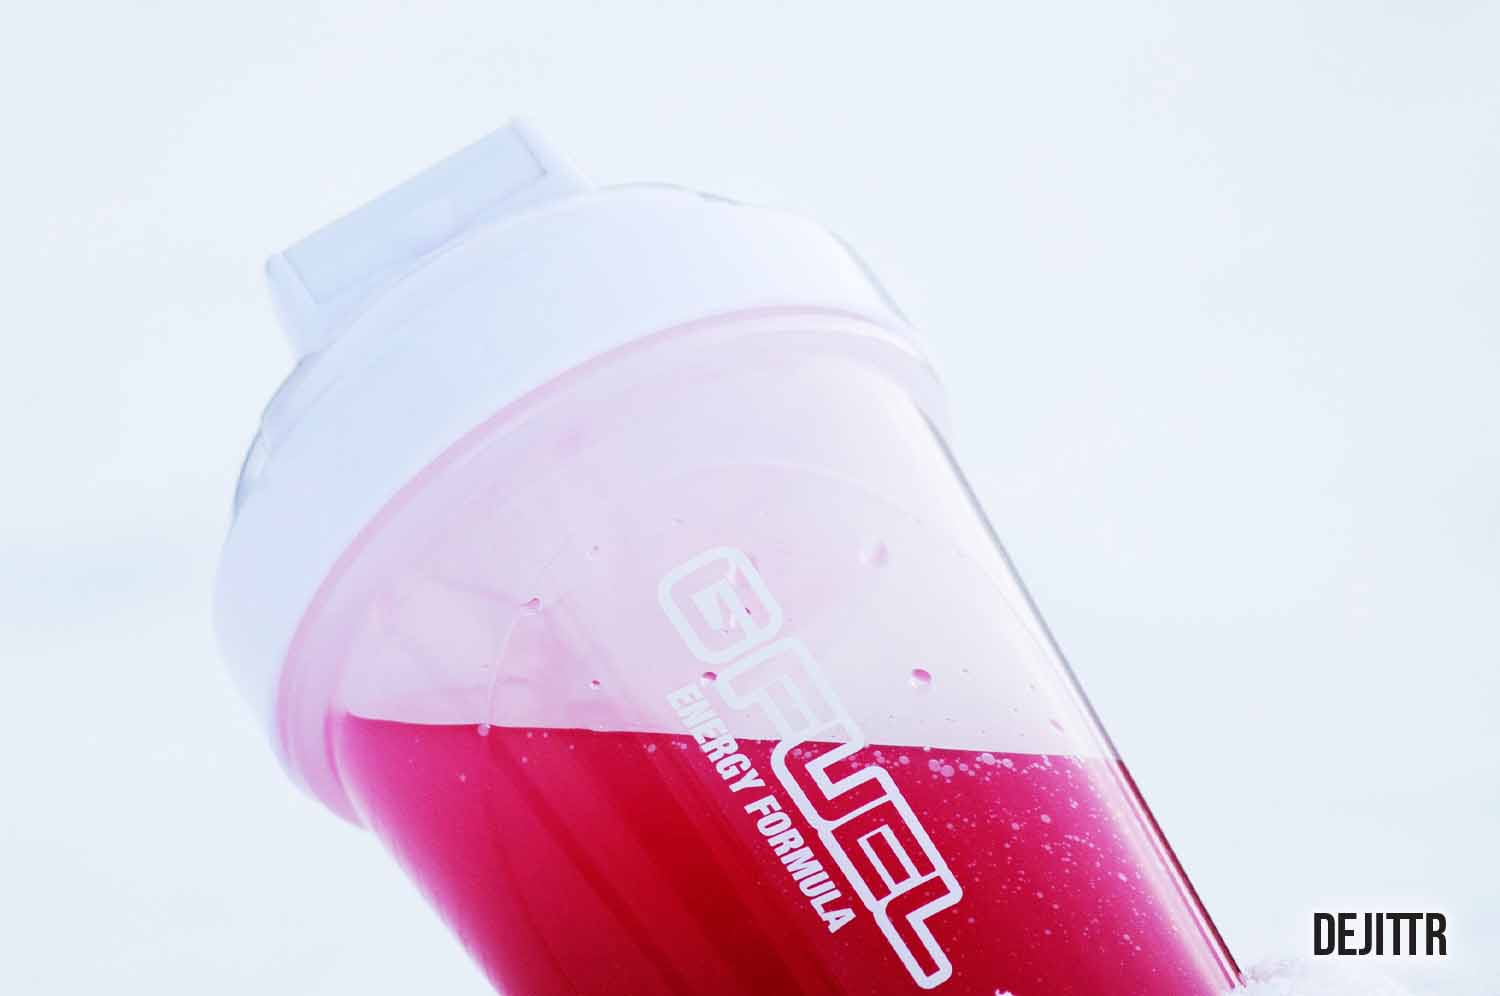 G FUEL - Where my crybaby kyles at??